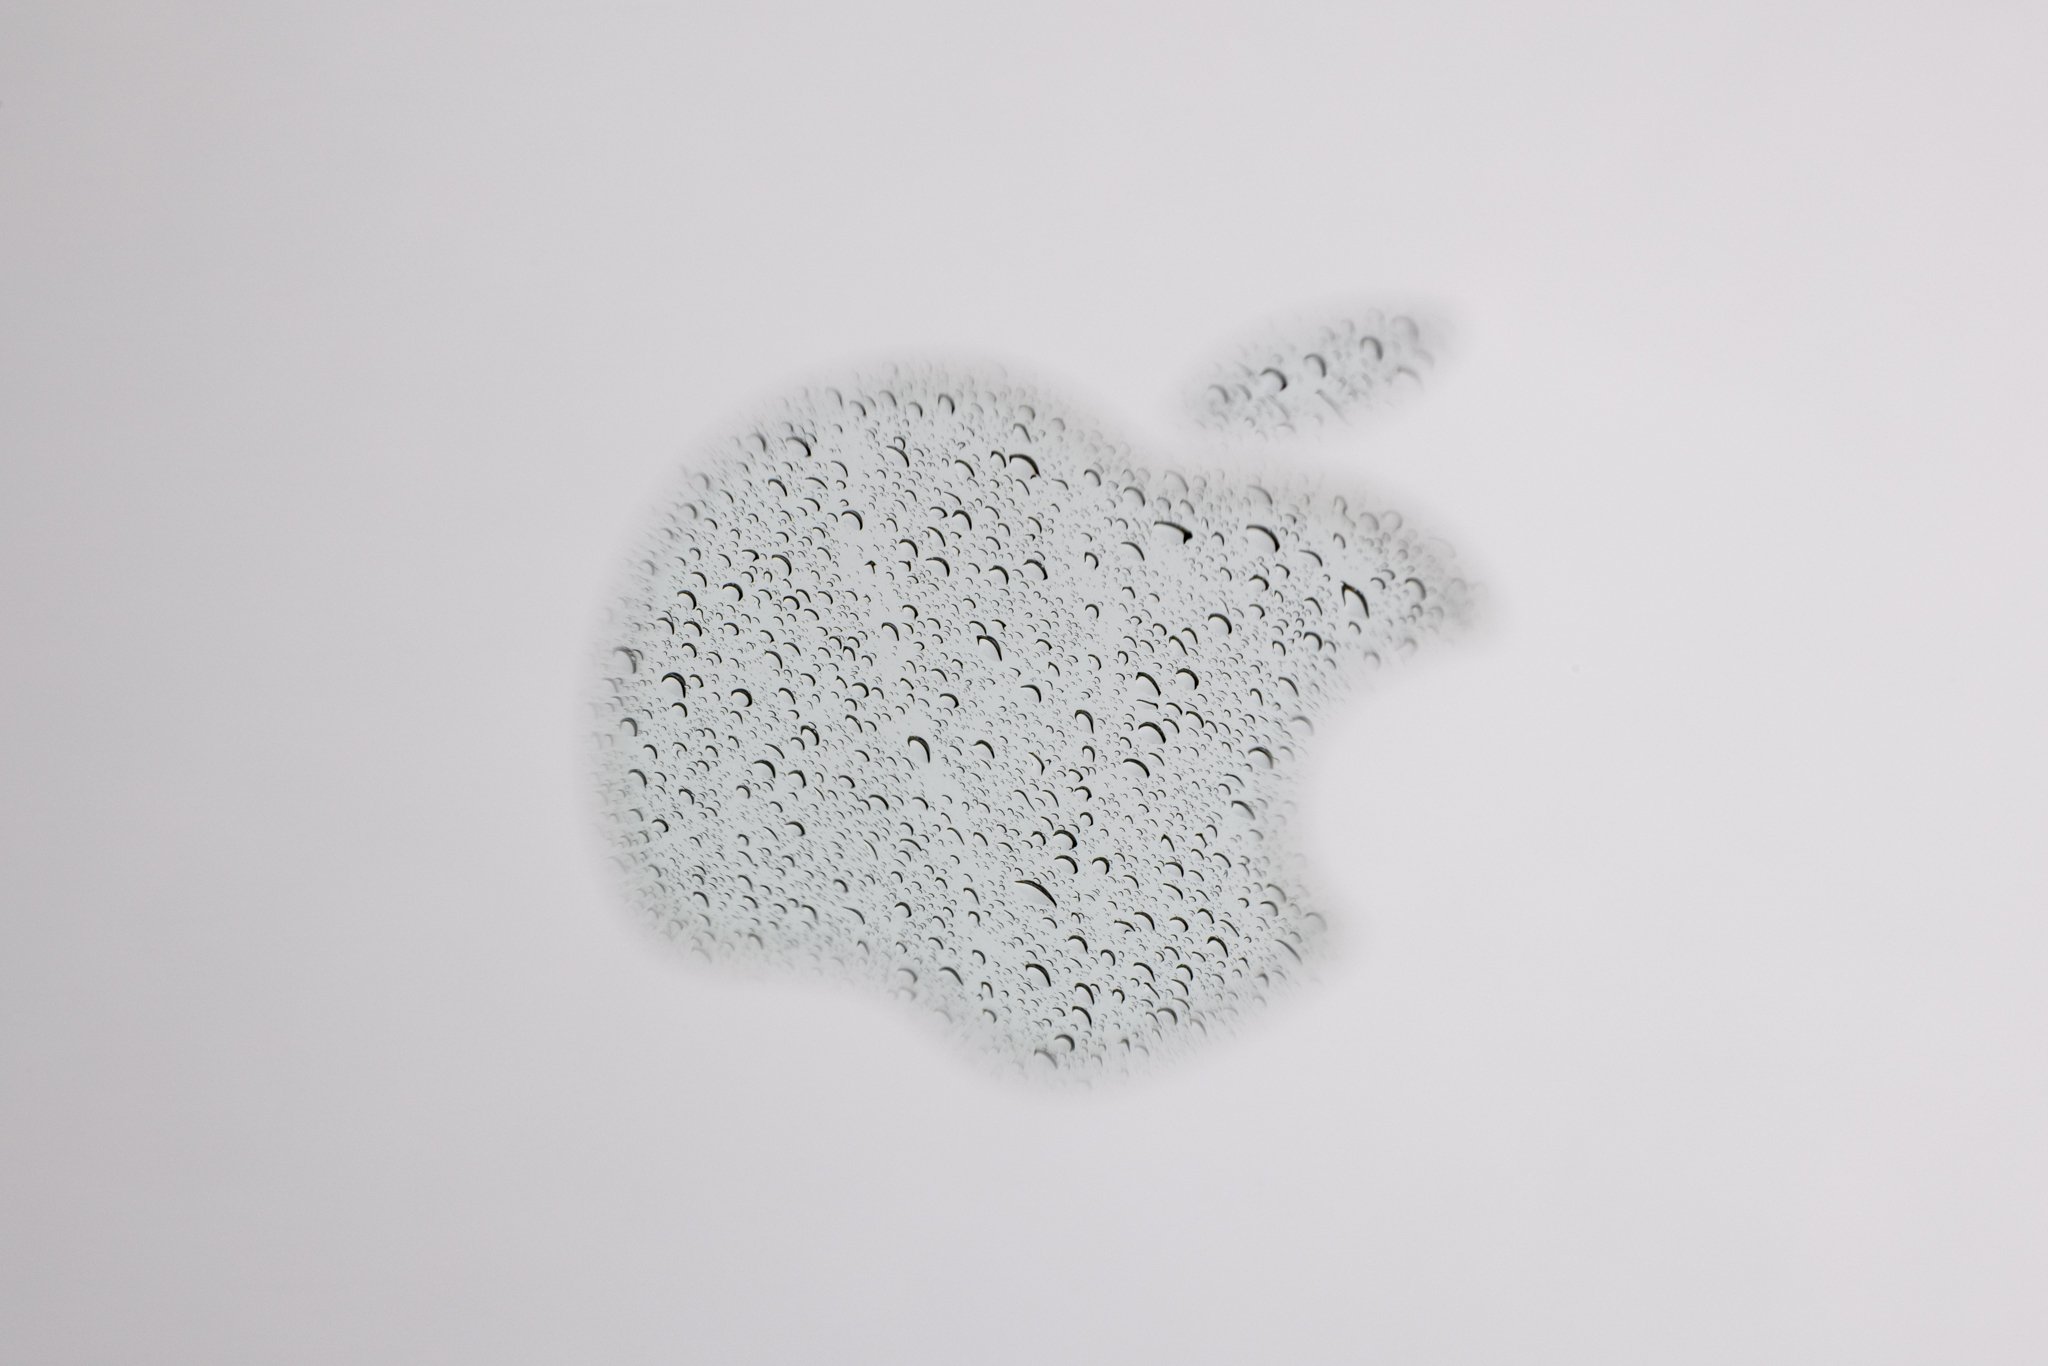 A reflection of rain in the Apple logo on a laptop photographed at f/22